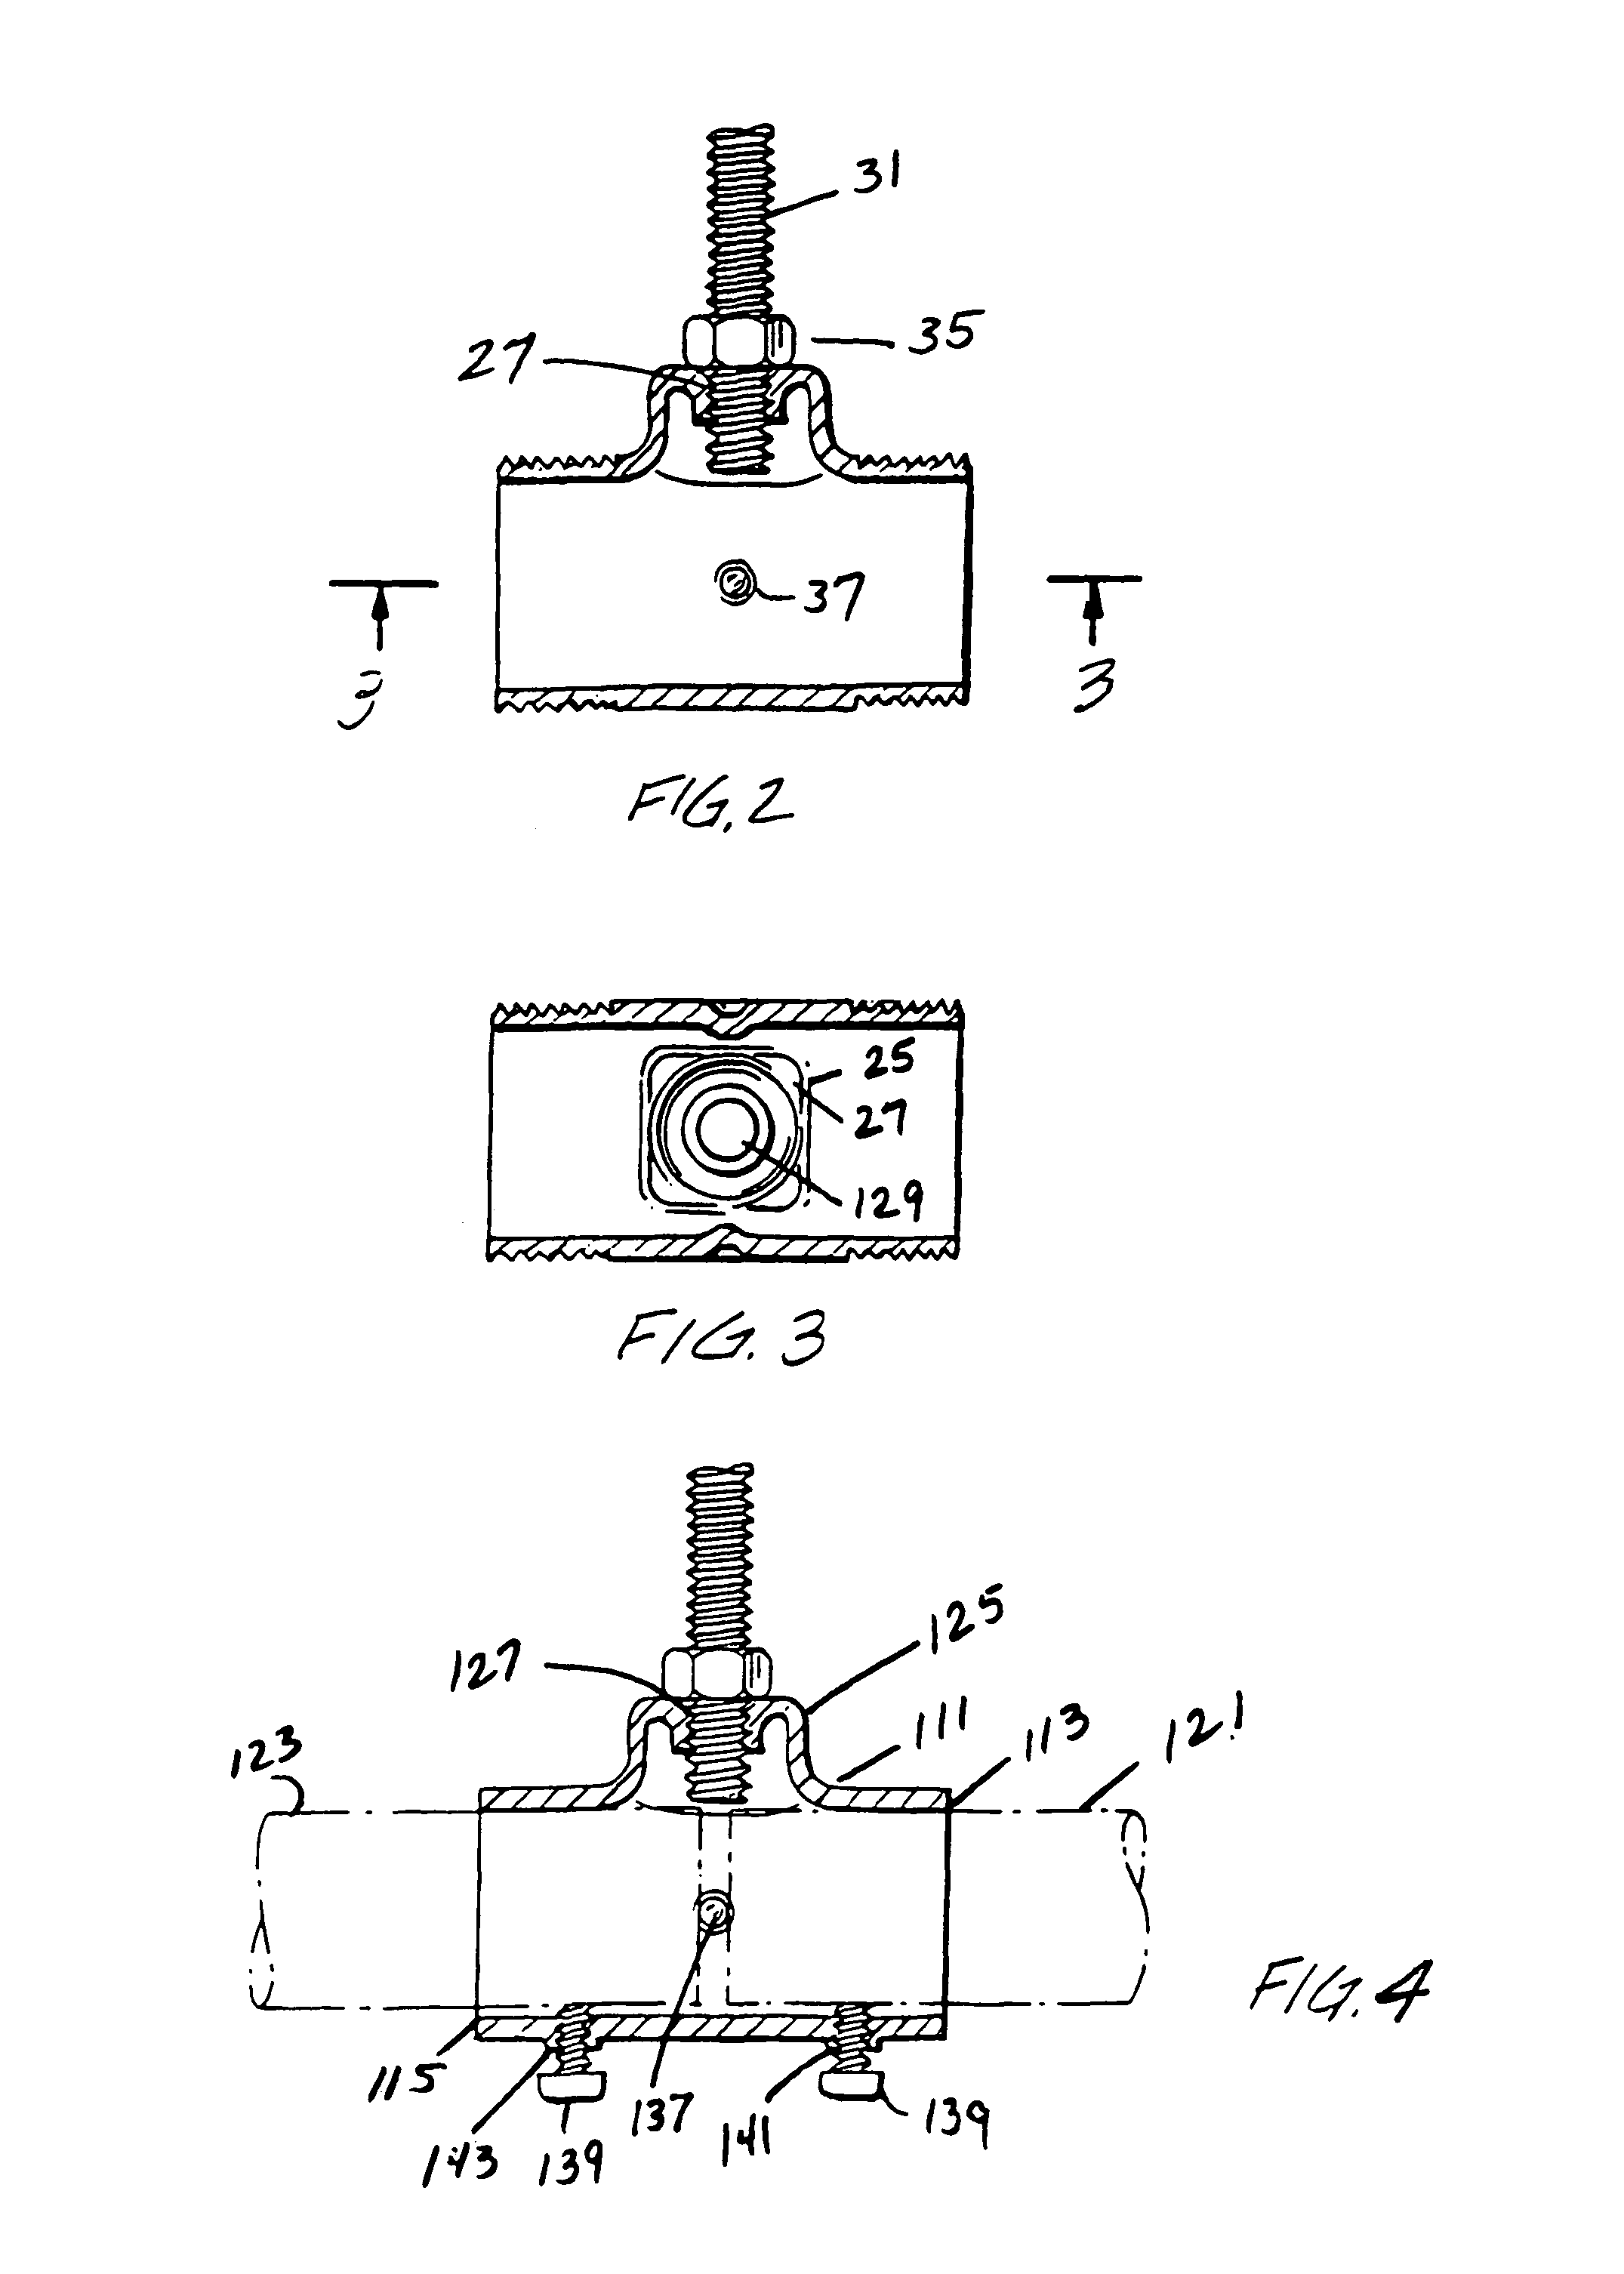 Connector for electrical wire-carrying conduits